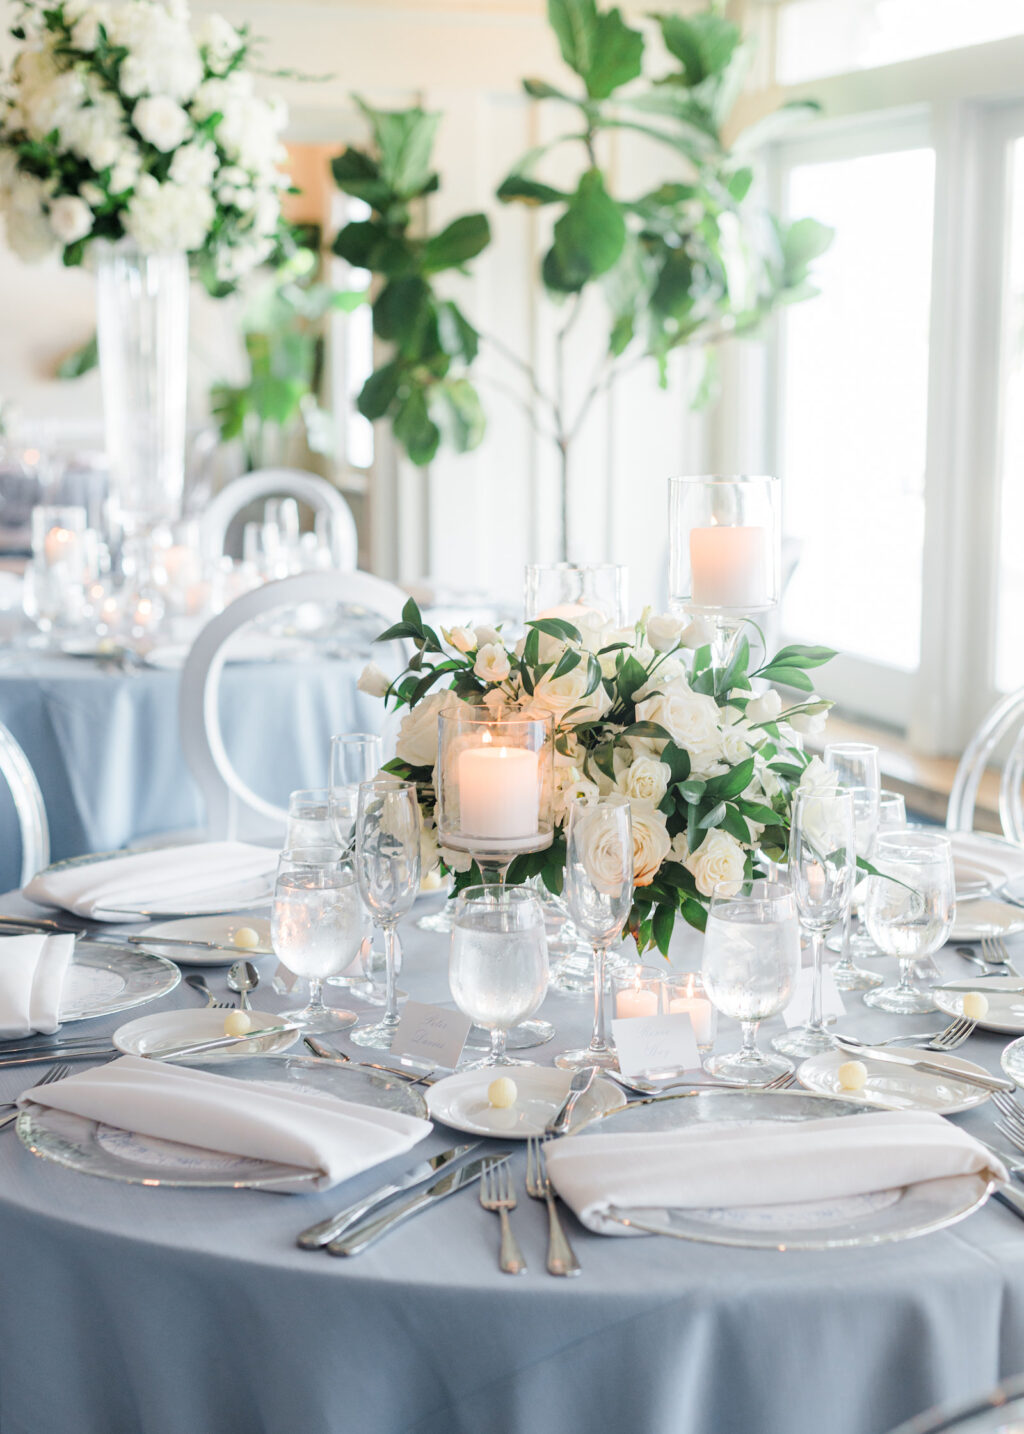 Elegant Light Blue and White Clearwater Wedding with White and Clear Ghost Chairs | Clearwater Beach Wedding Planner Parties A'La Carte | Clearwater Wedding Florist Bruce Wayne Florals | Carlouel Yacht Club | Wedding Rentals Gabro Event Services